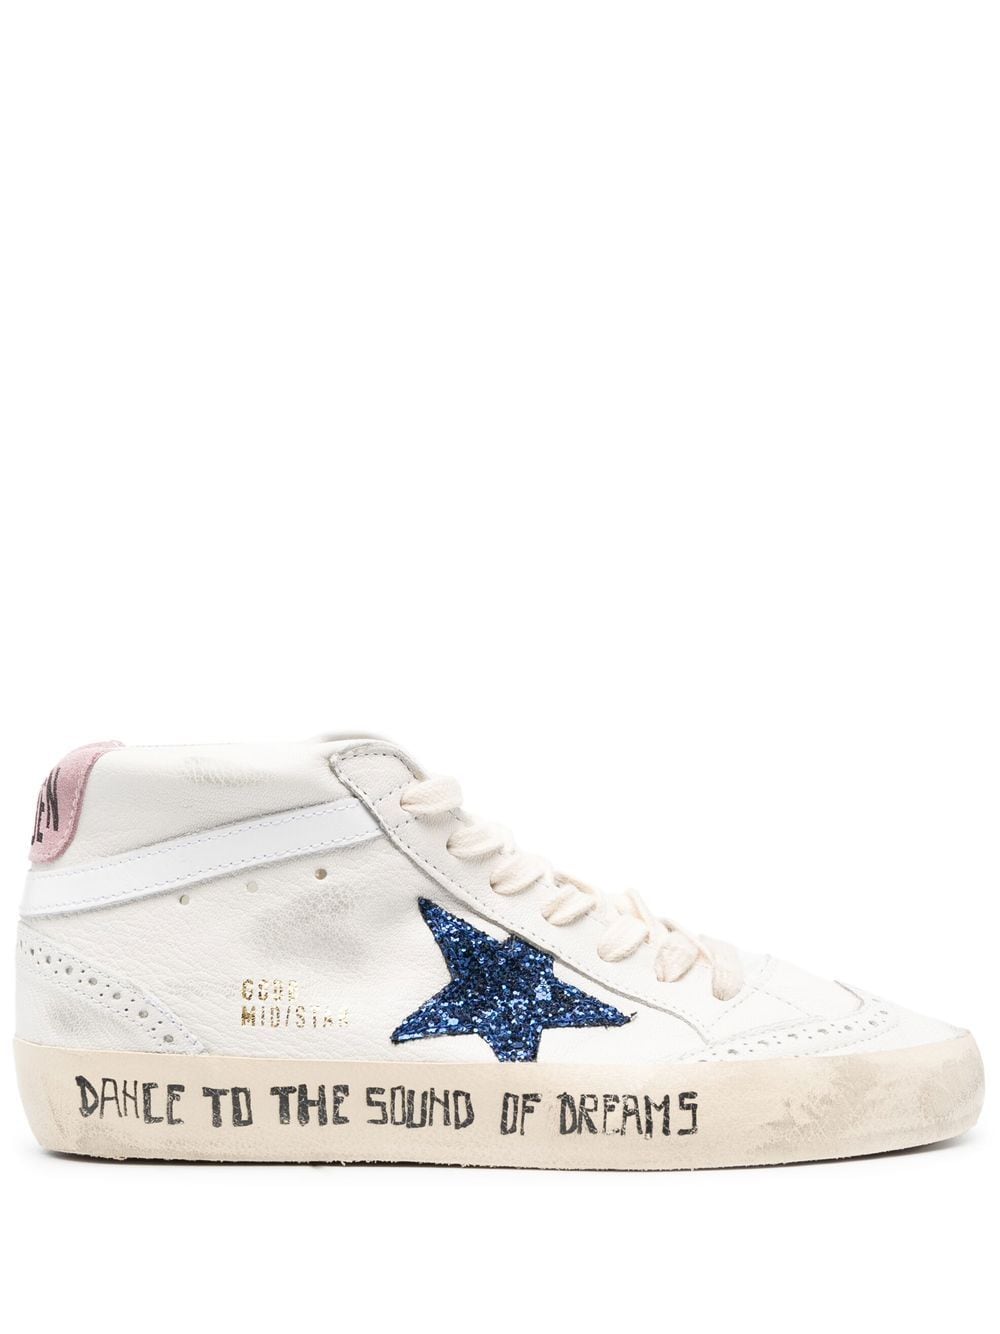 Golden Goose Mid Star lace-up sneakers - White von Golden Goose